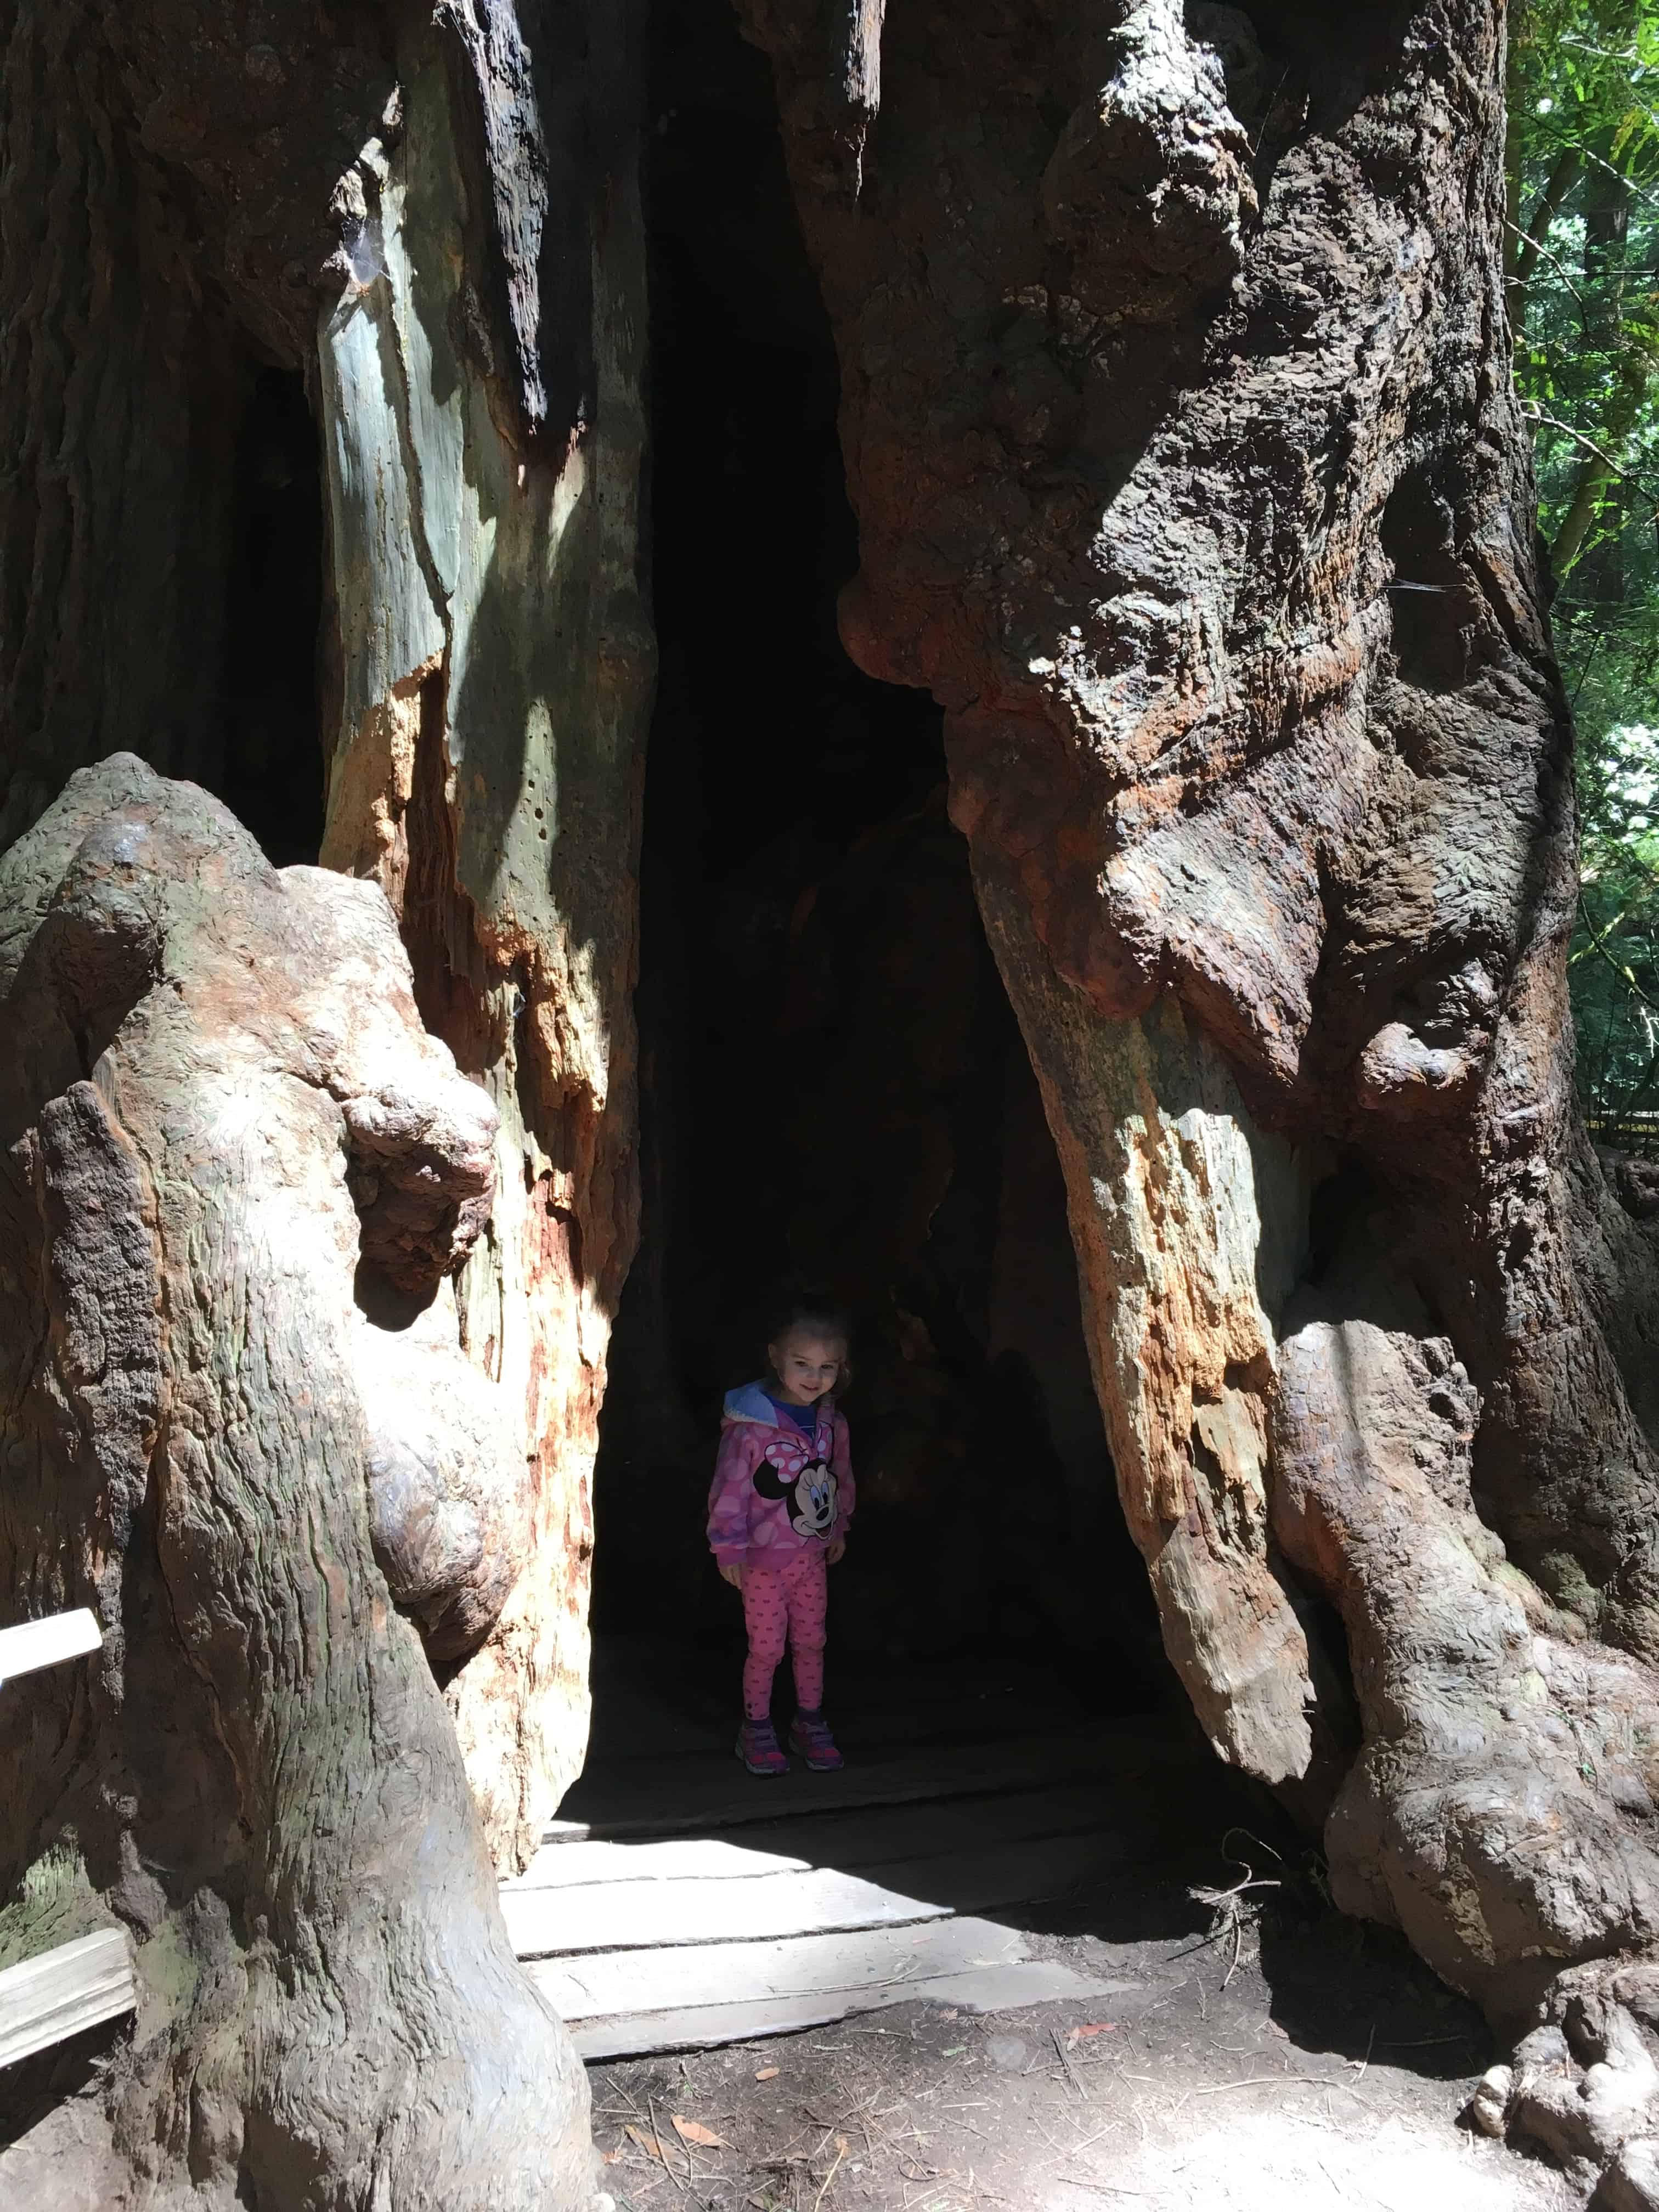 Looking for fun things to do in San Francisco with kids? Traveling with children is hard. Here are things to do in san francisco with toddlers, young kids and even babies. #sanfrancisco